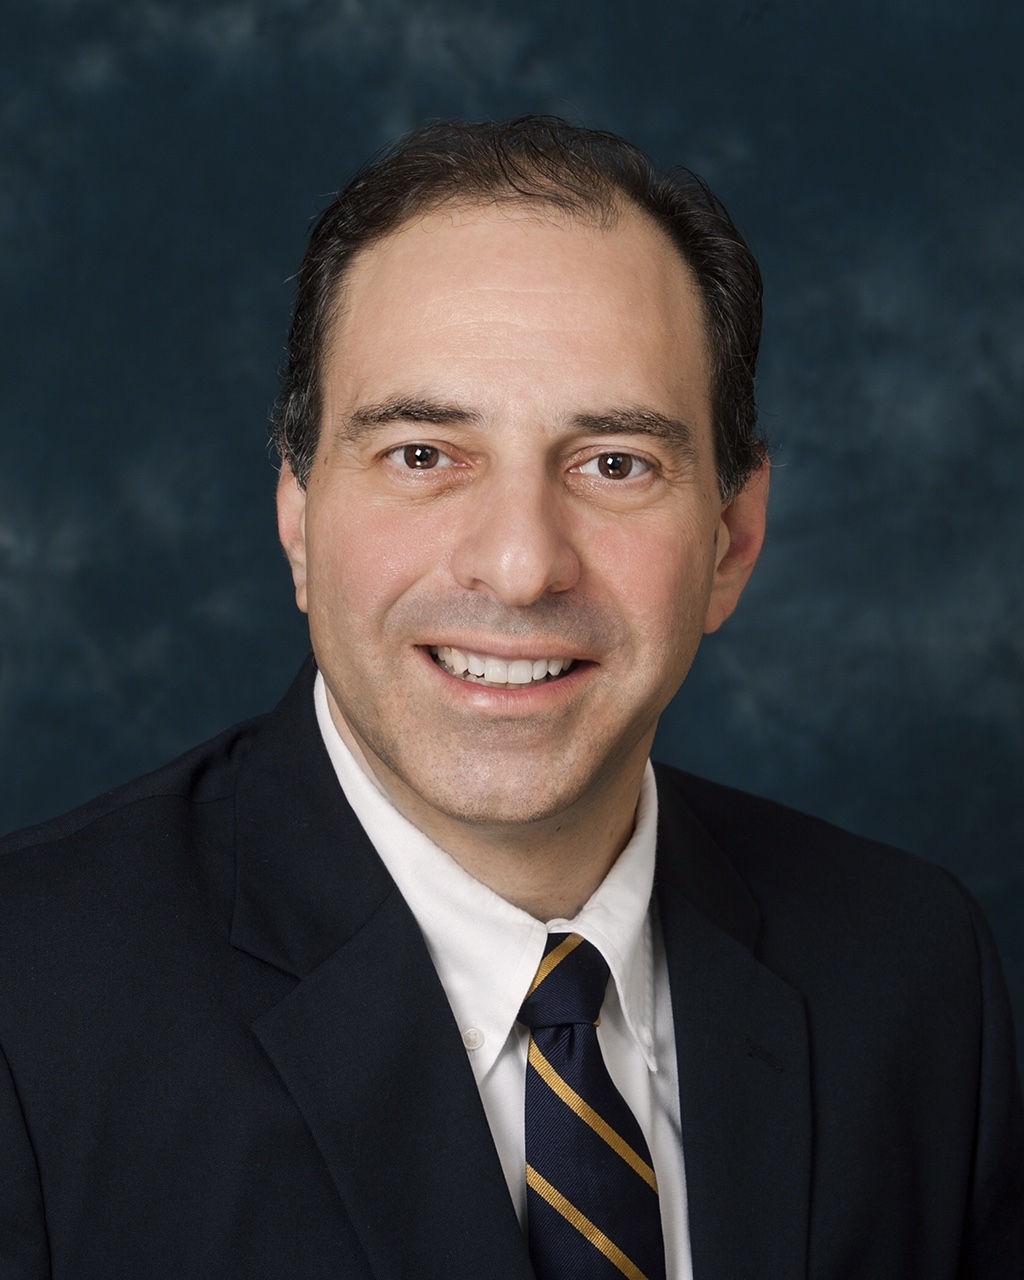 Profile photo for Anthony J. Annunziato, Ed.D.